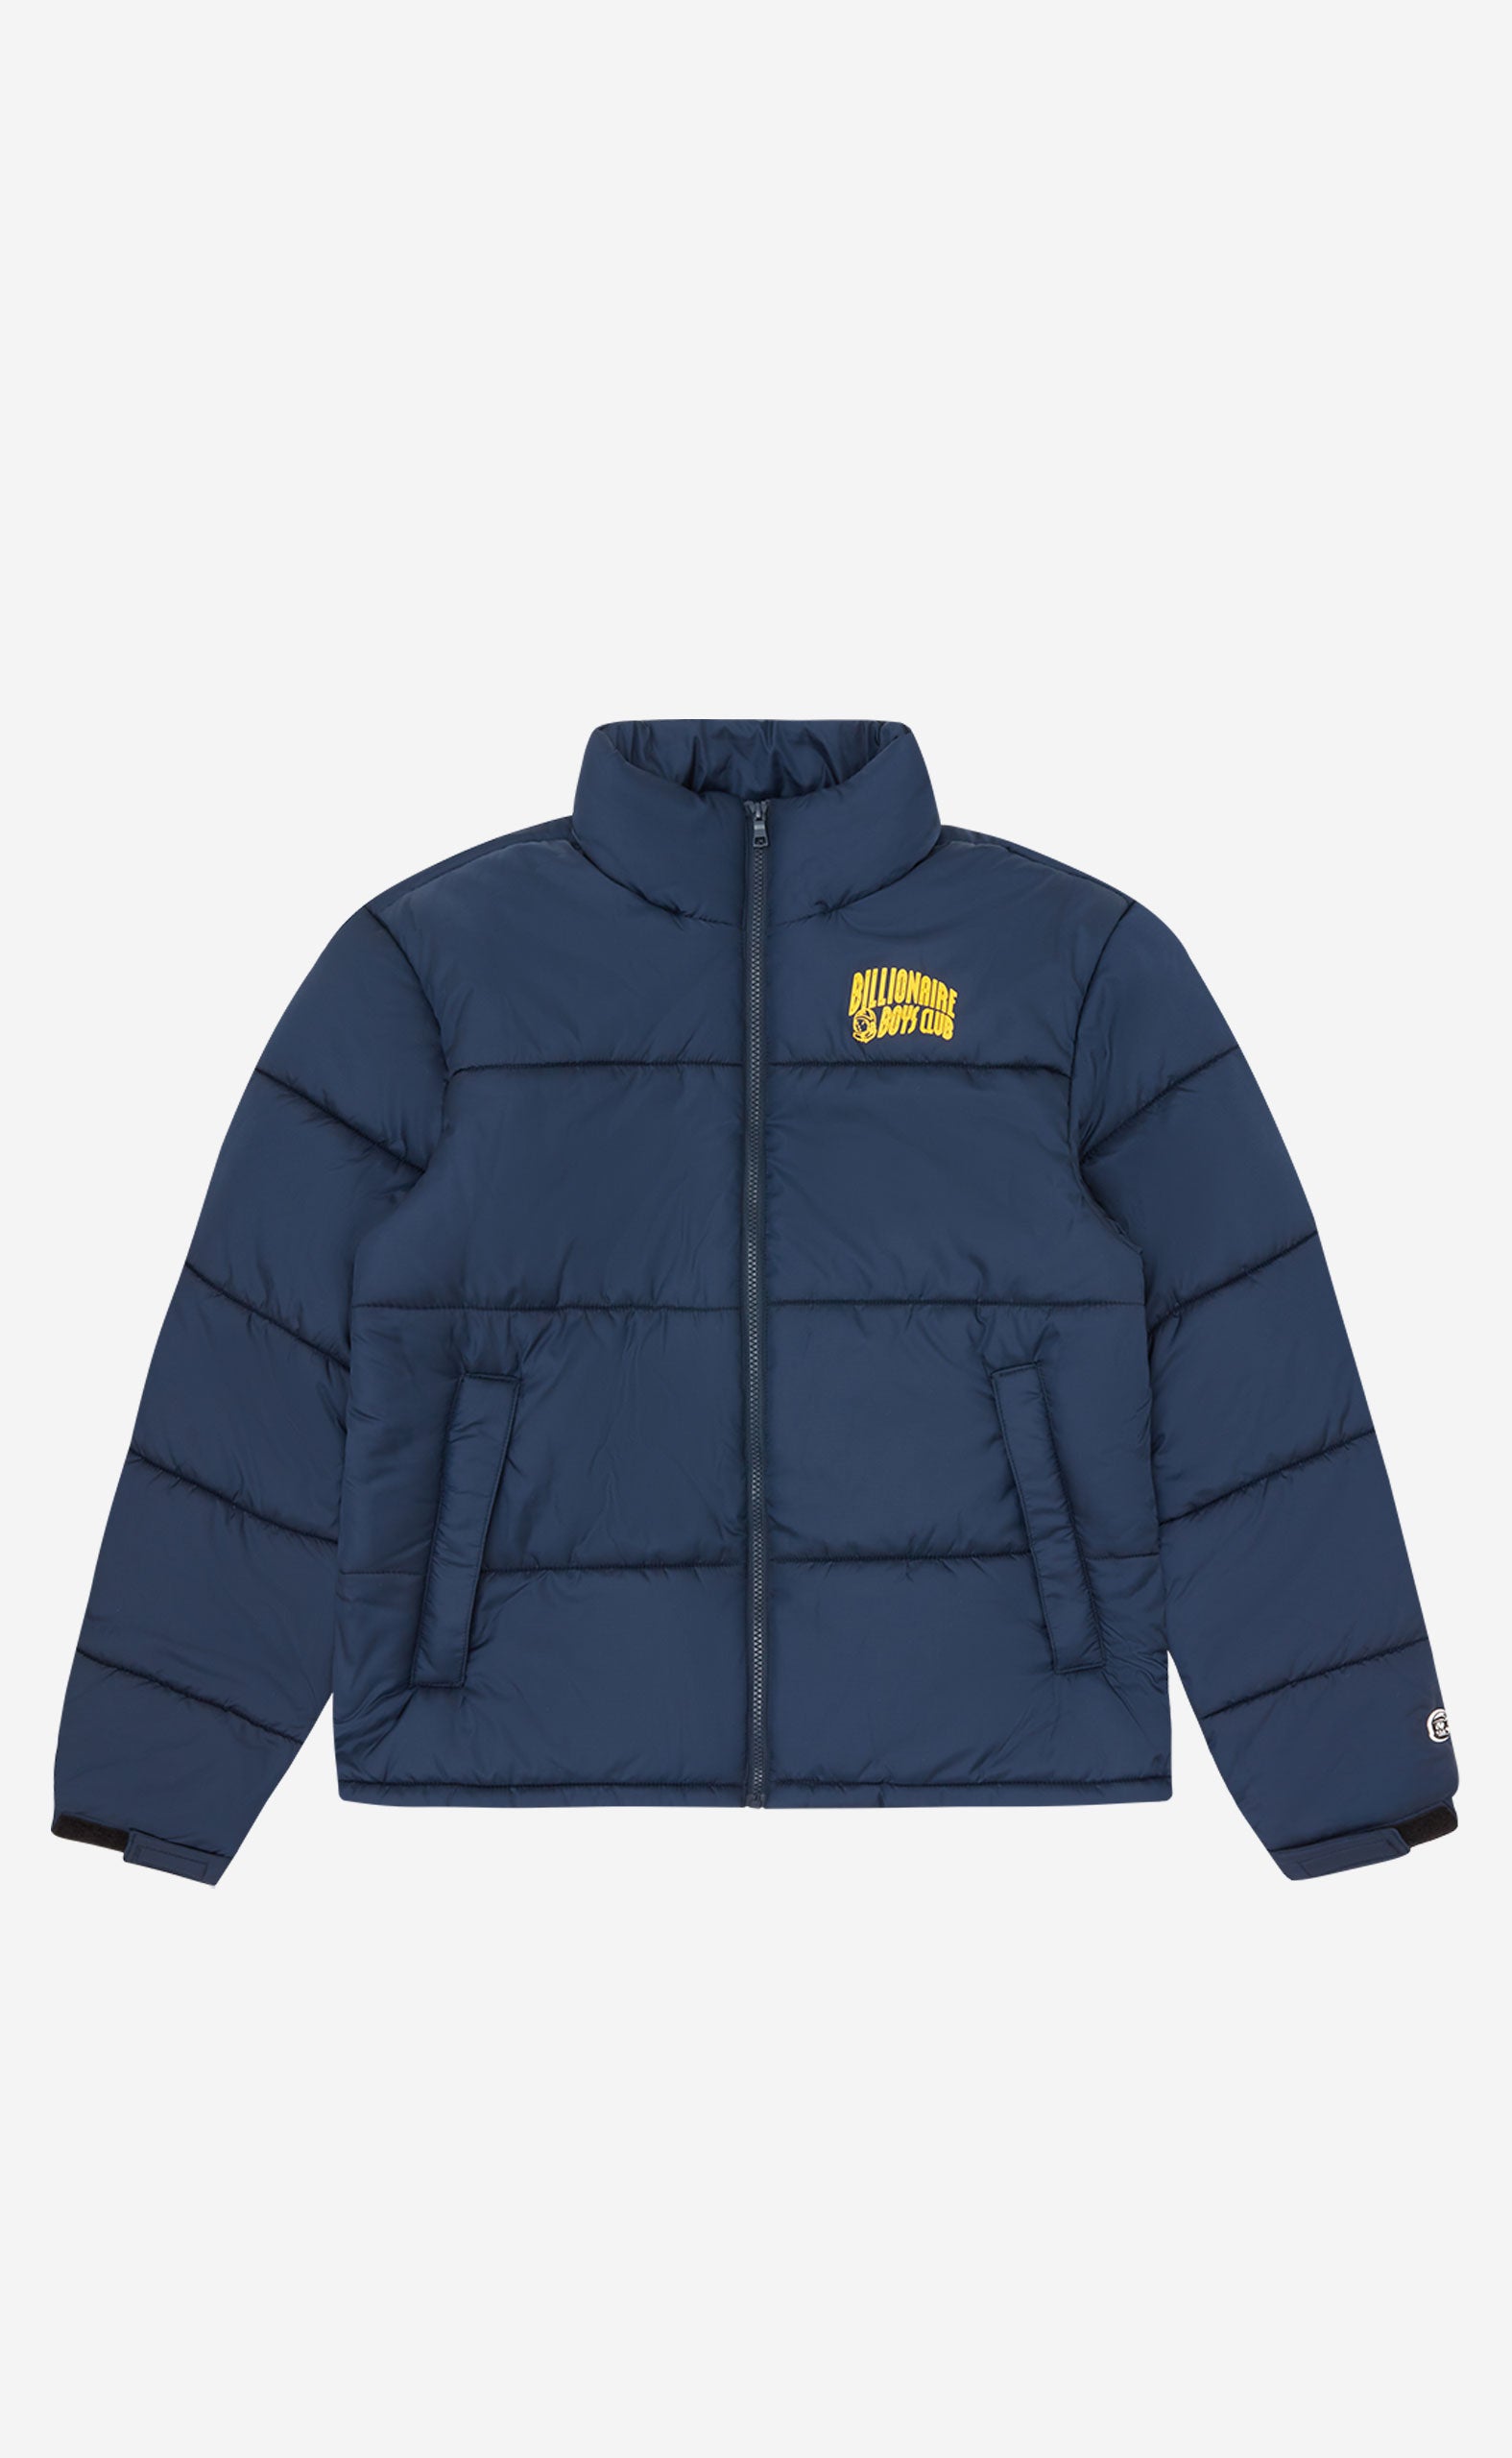 NAVY SMALL ARCH LOGO PUFFER JACKET